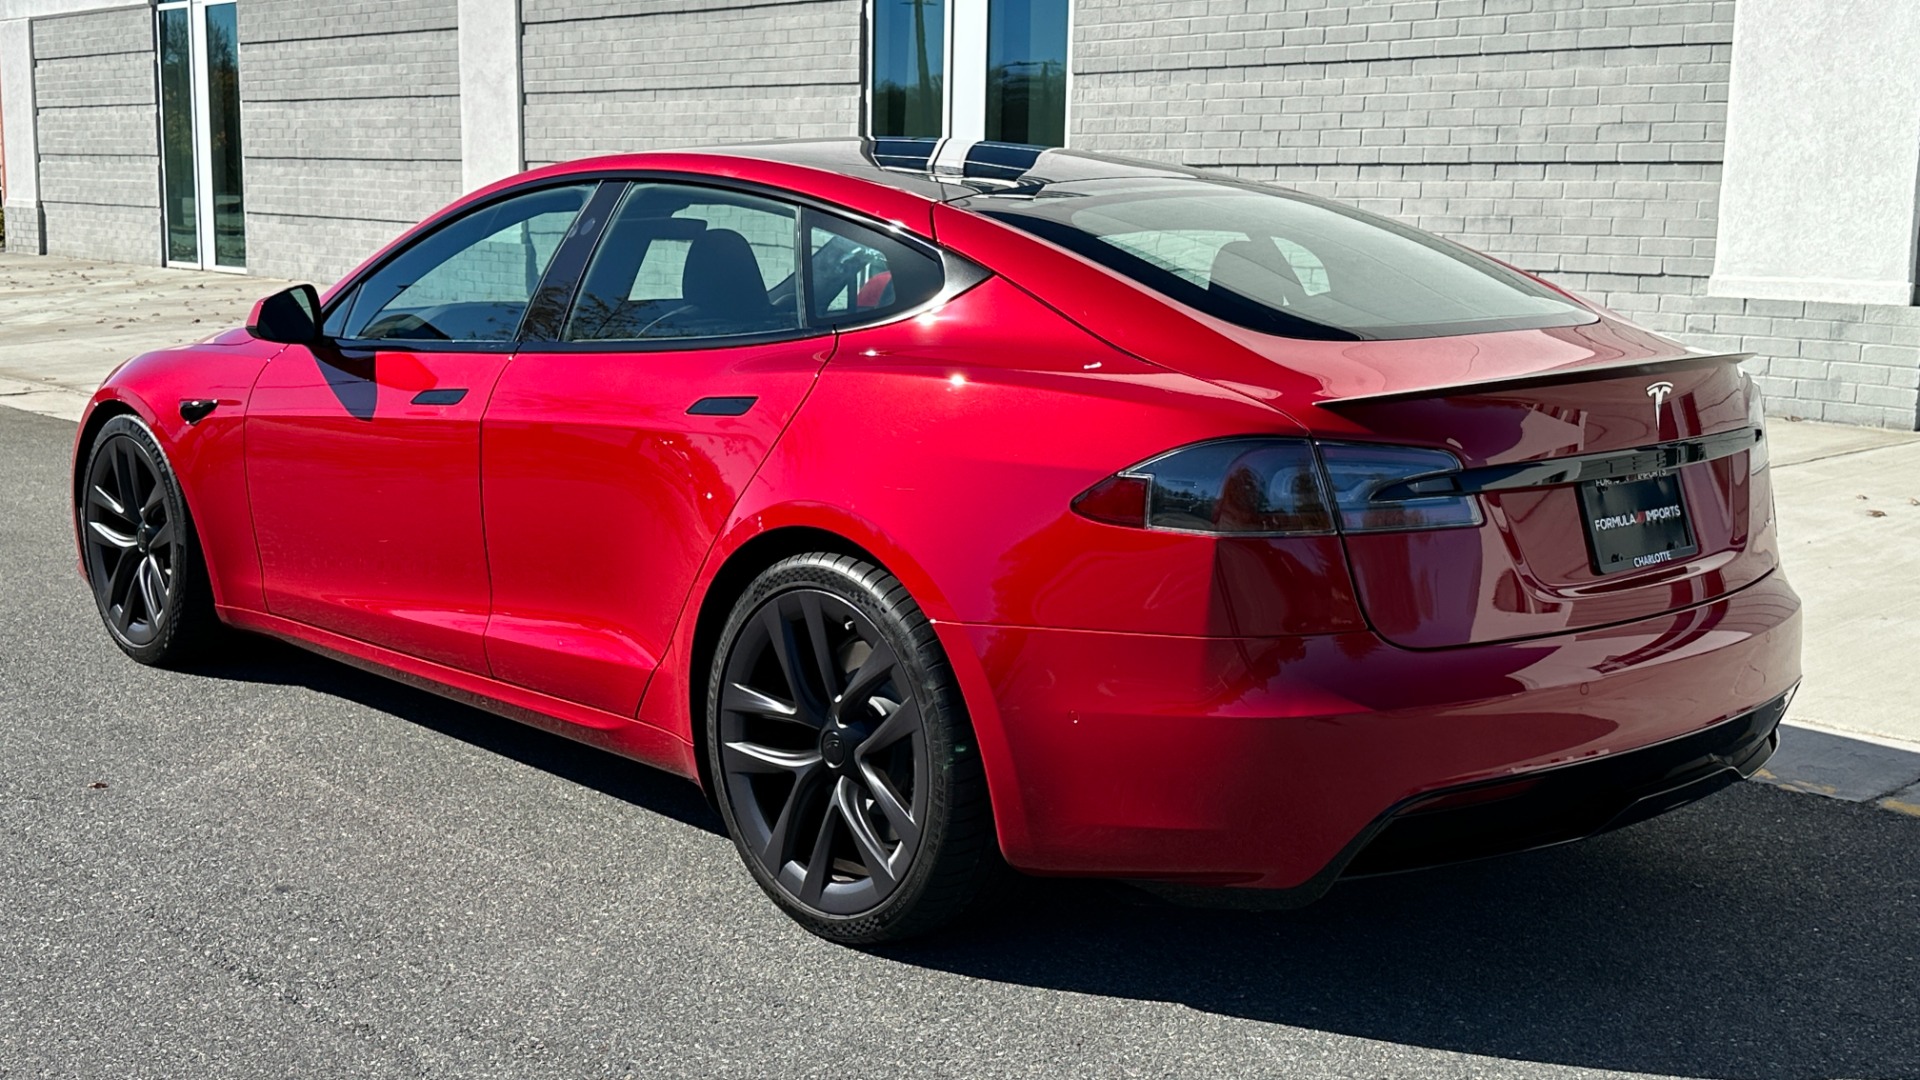 Used 2021 Tesla Model S PLAID / FULL SELF DRIVING / STANDARD CONNECTIVITY / CHARING CABLE / CARBON  for sale $117,995 at Formula Imports in Charlotte NC 28227 8